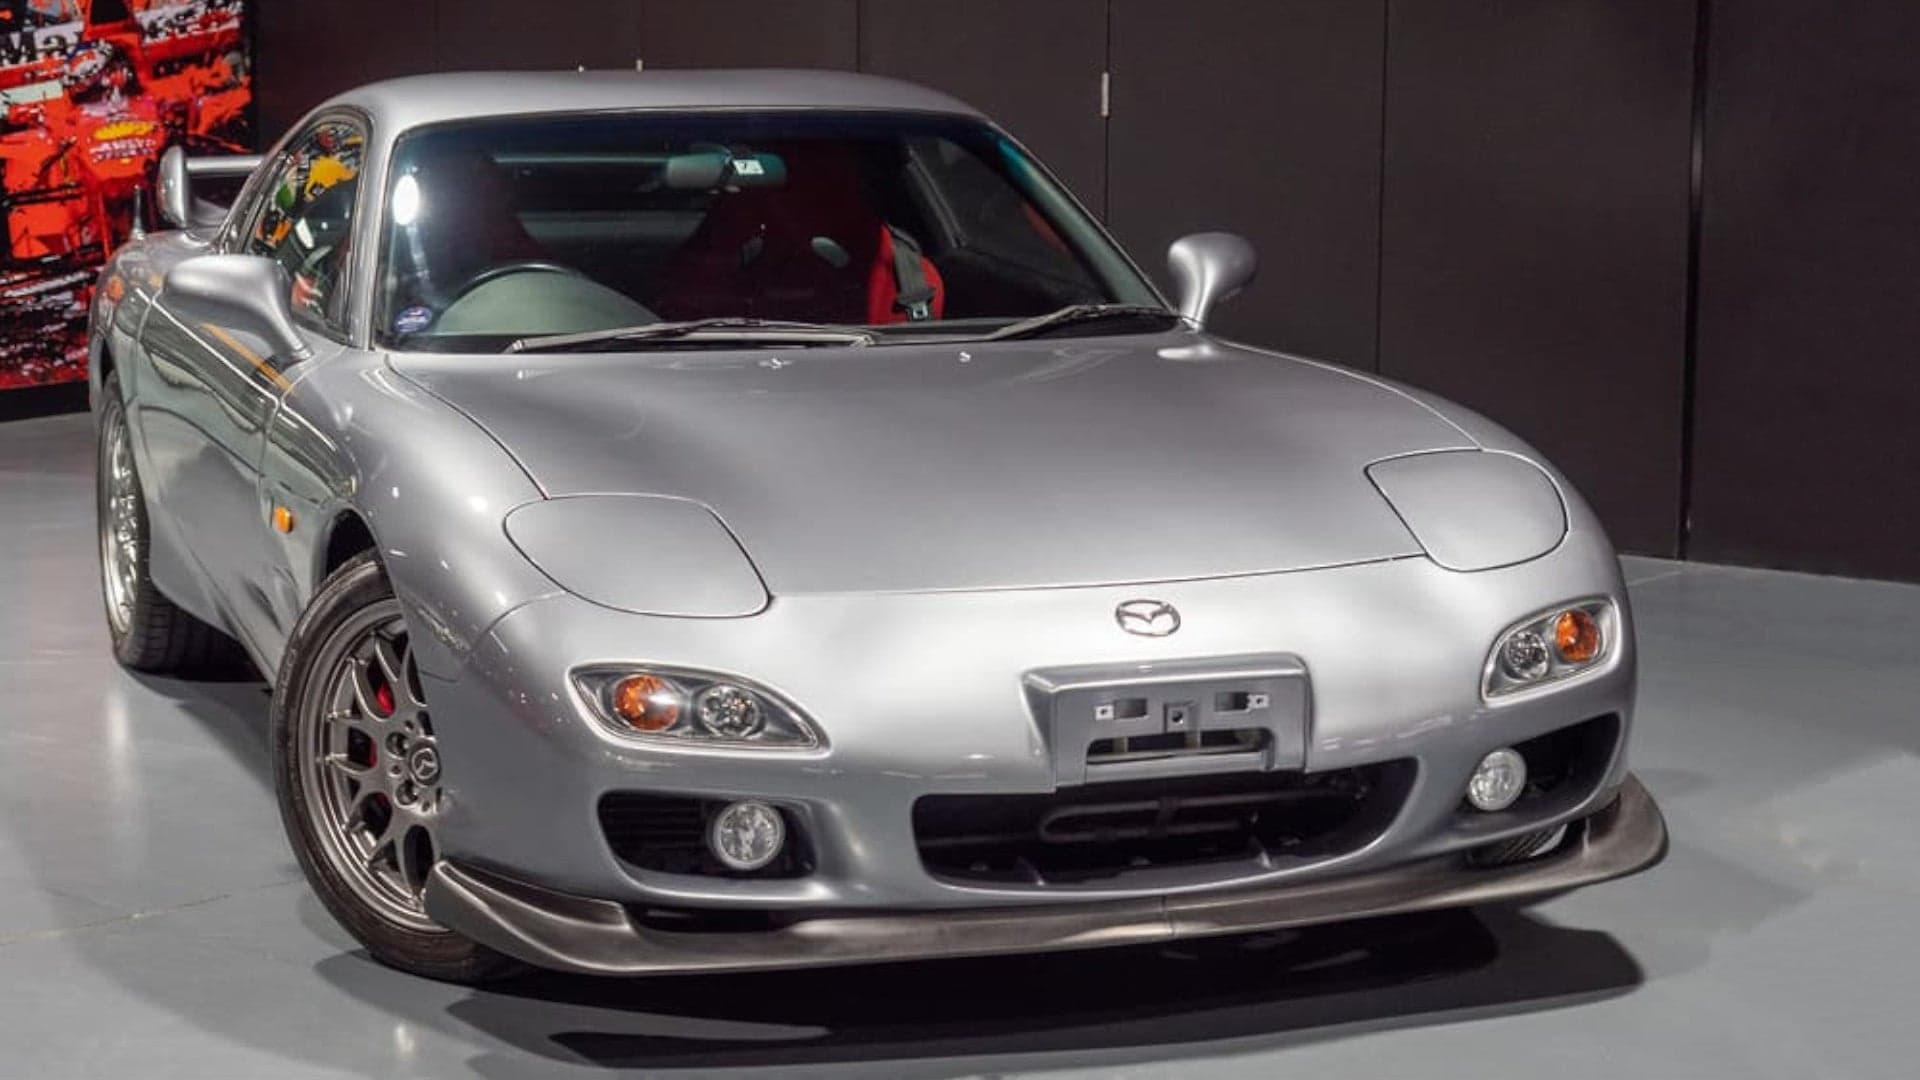 This ‘Immaculate’ JDM Mazda RX-7 Had Its Dark Past Revealed by a Forum